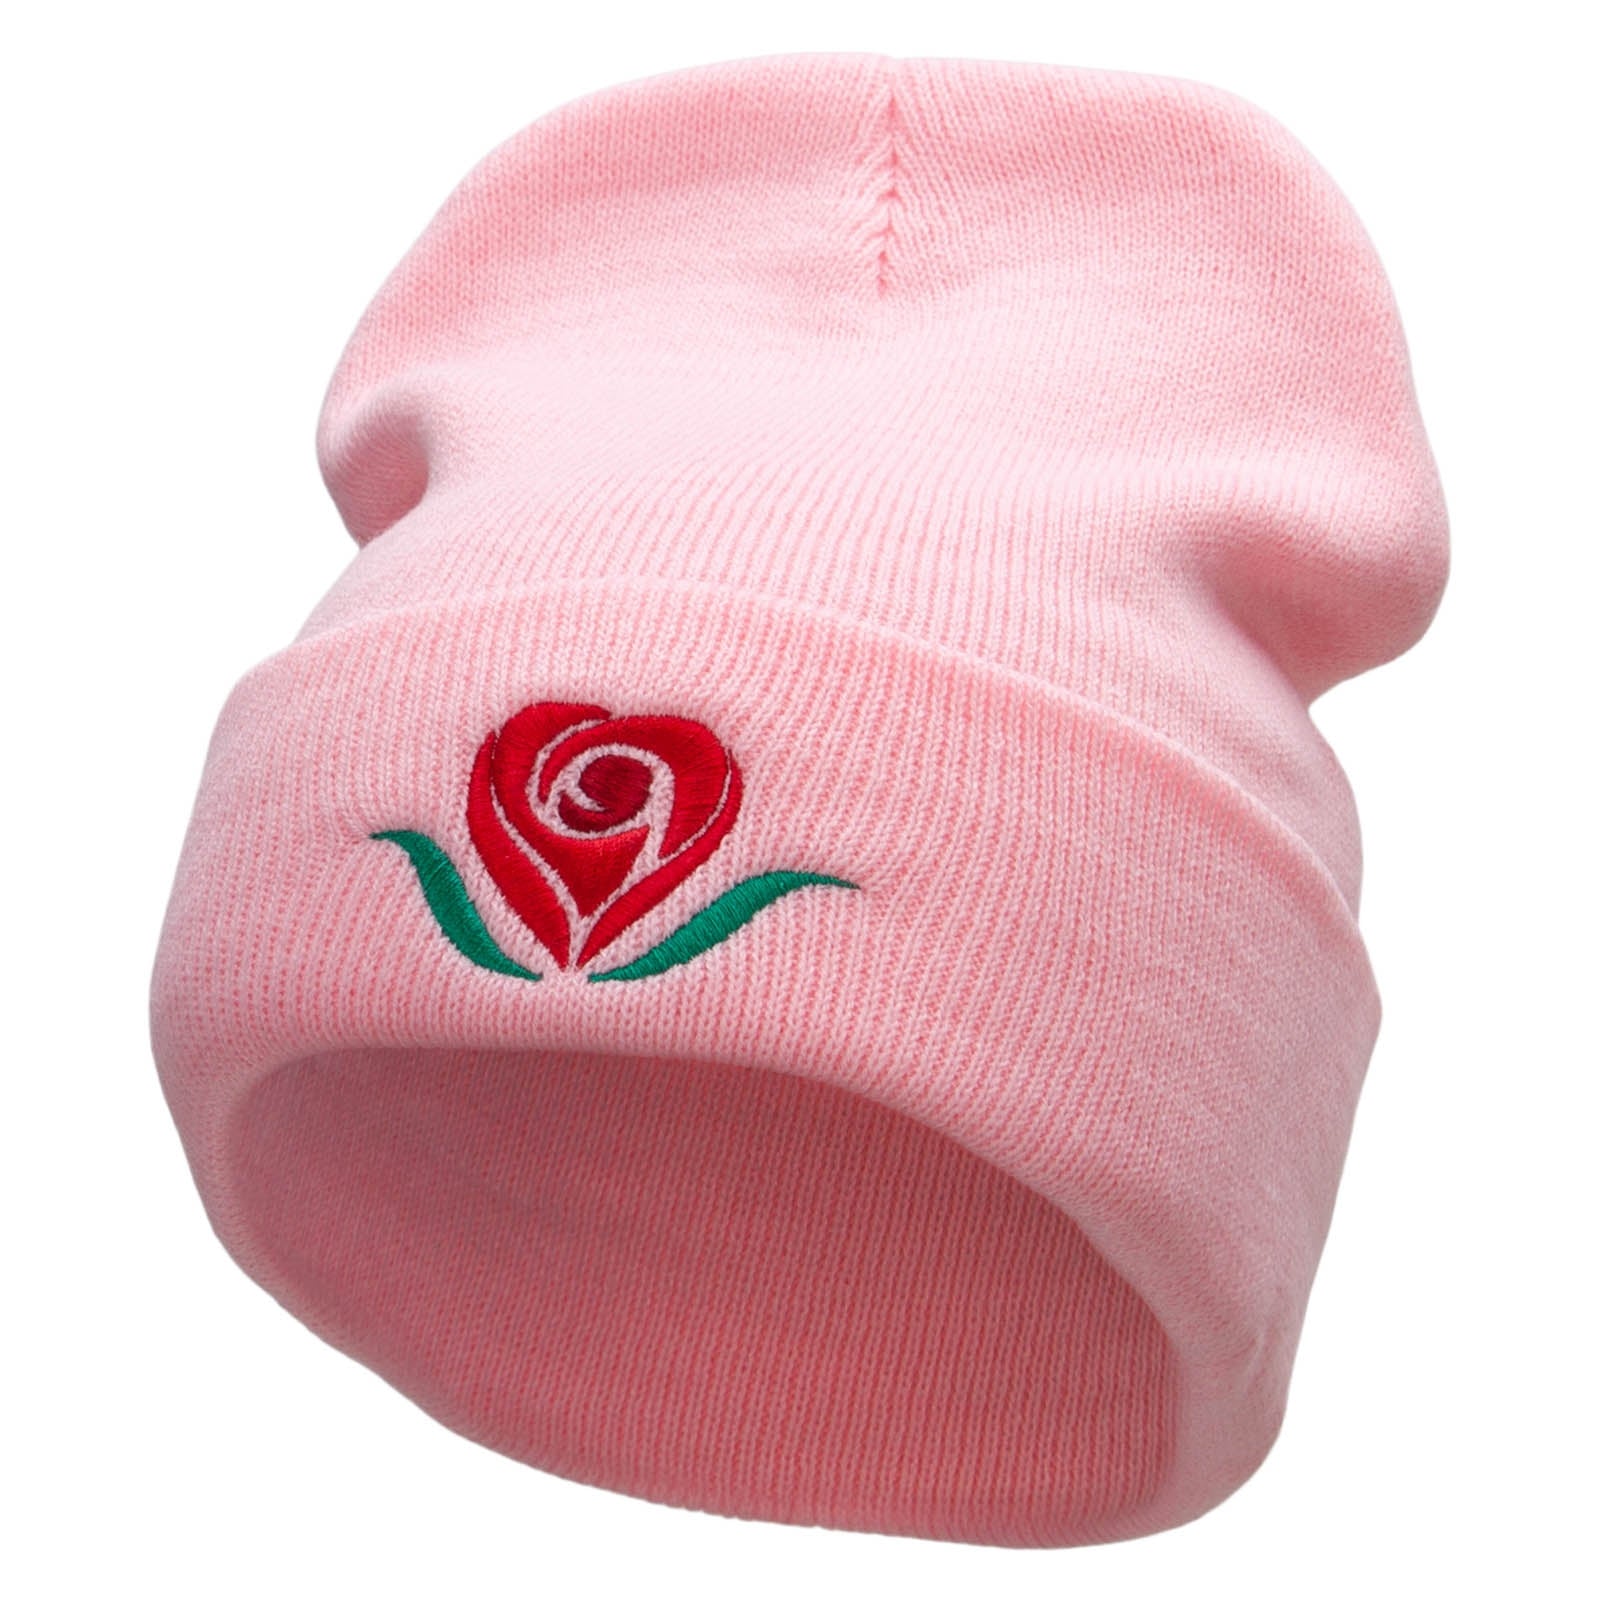 Rosey Heart Symbol Embroidered 12 inch Acrylic Cuffed Long Beanie - Pink OSFM